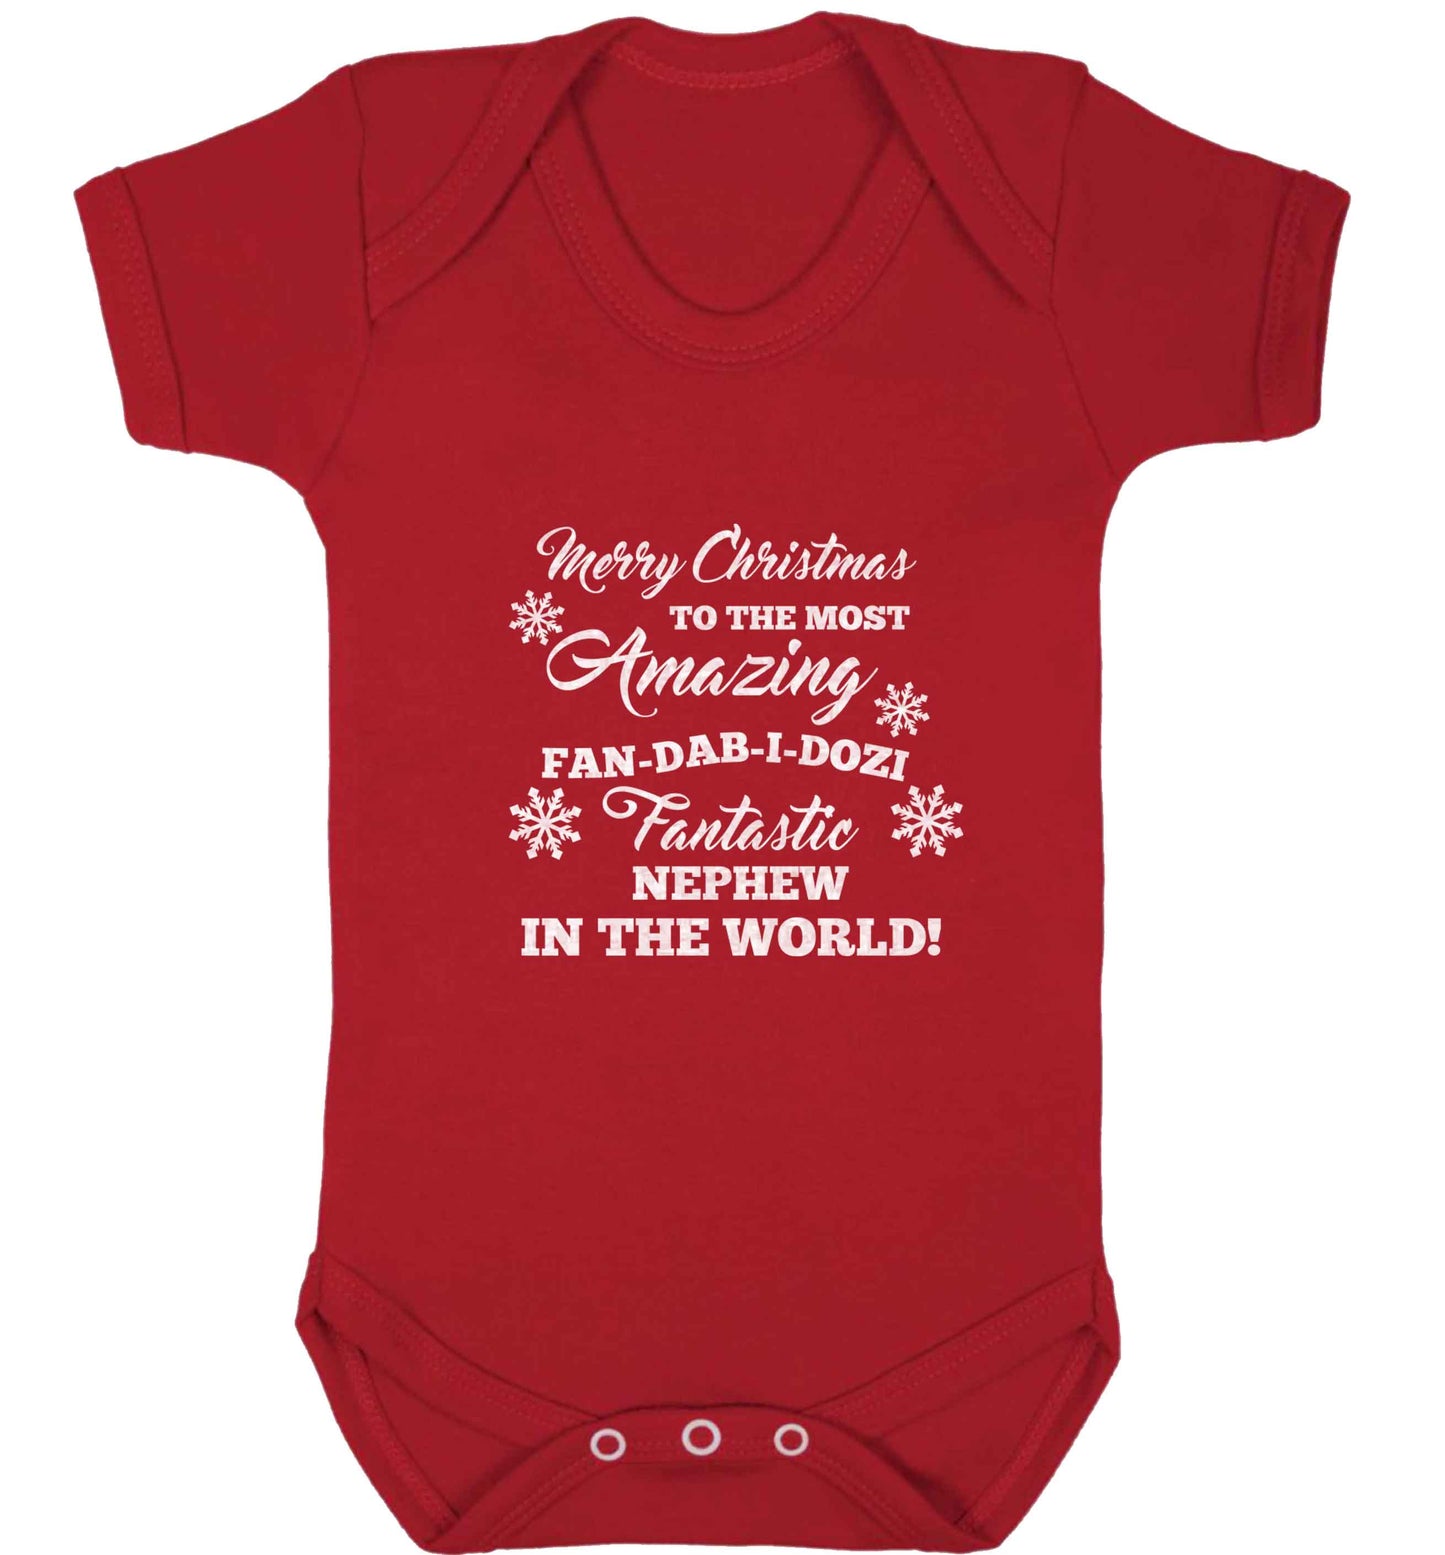 Merry Christmas to the most amazing fan-dab-i-dozi fantasic Nephew in the world baby vest red 18-24 months